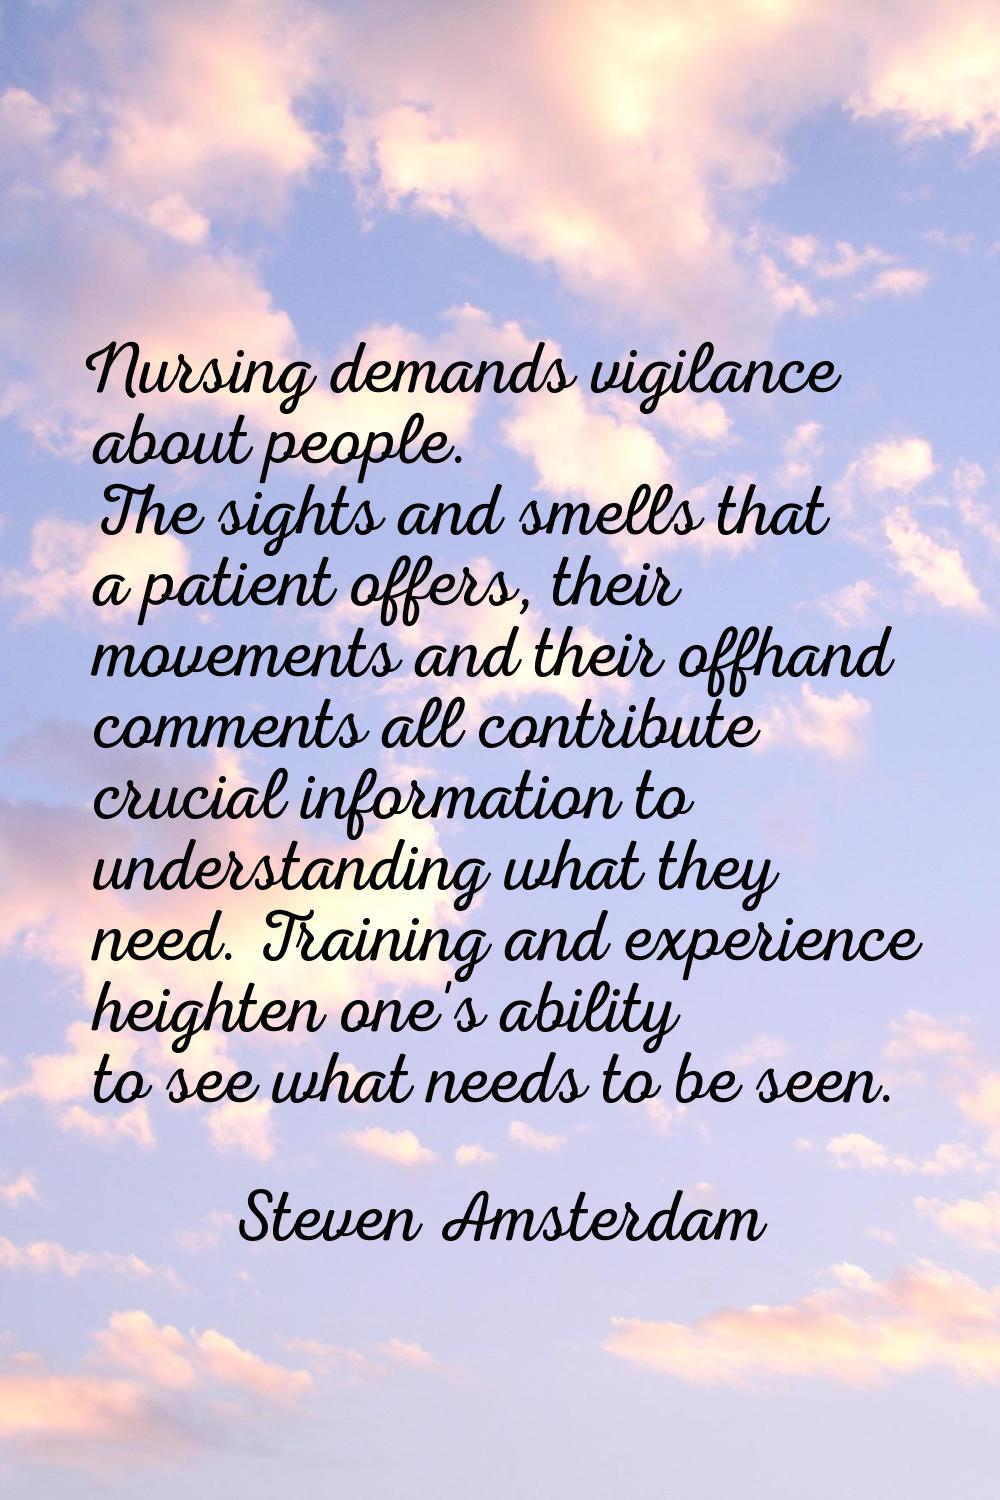 Nursing demands vigilance about people. The sights and smells that a patient offers, their movement